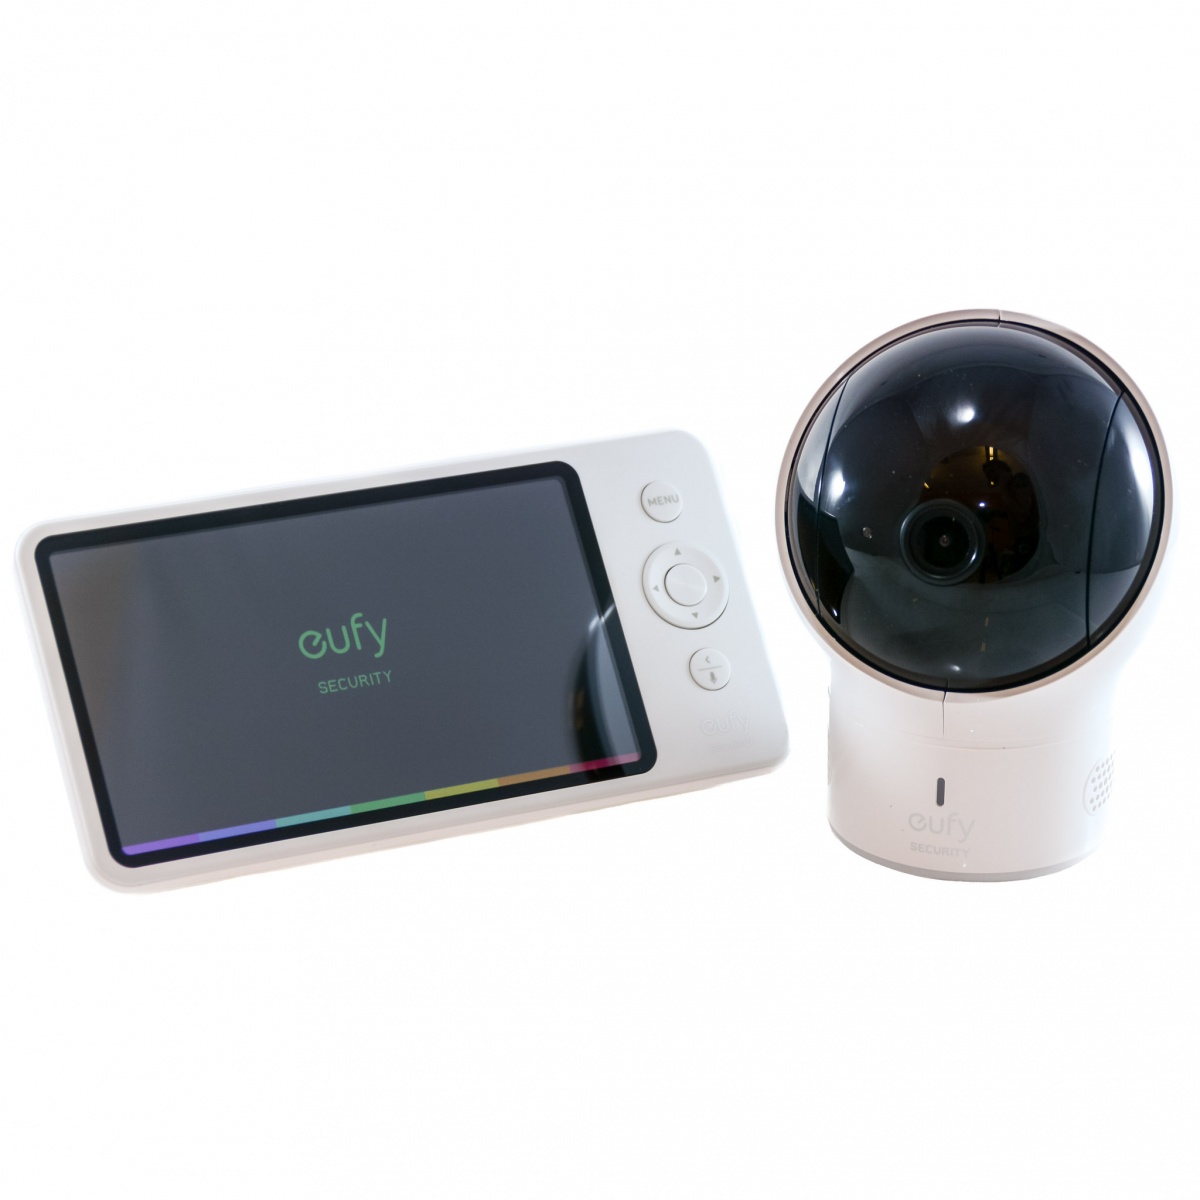 eufy spaceview video monitor review